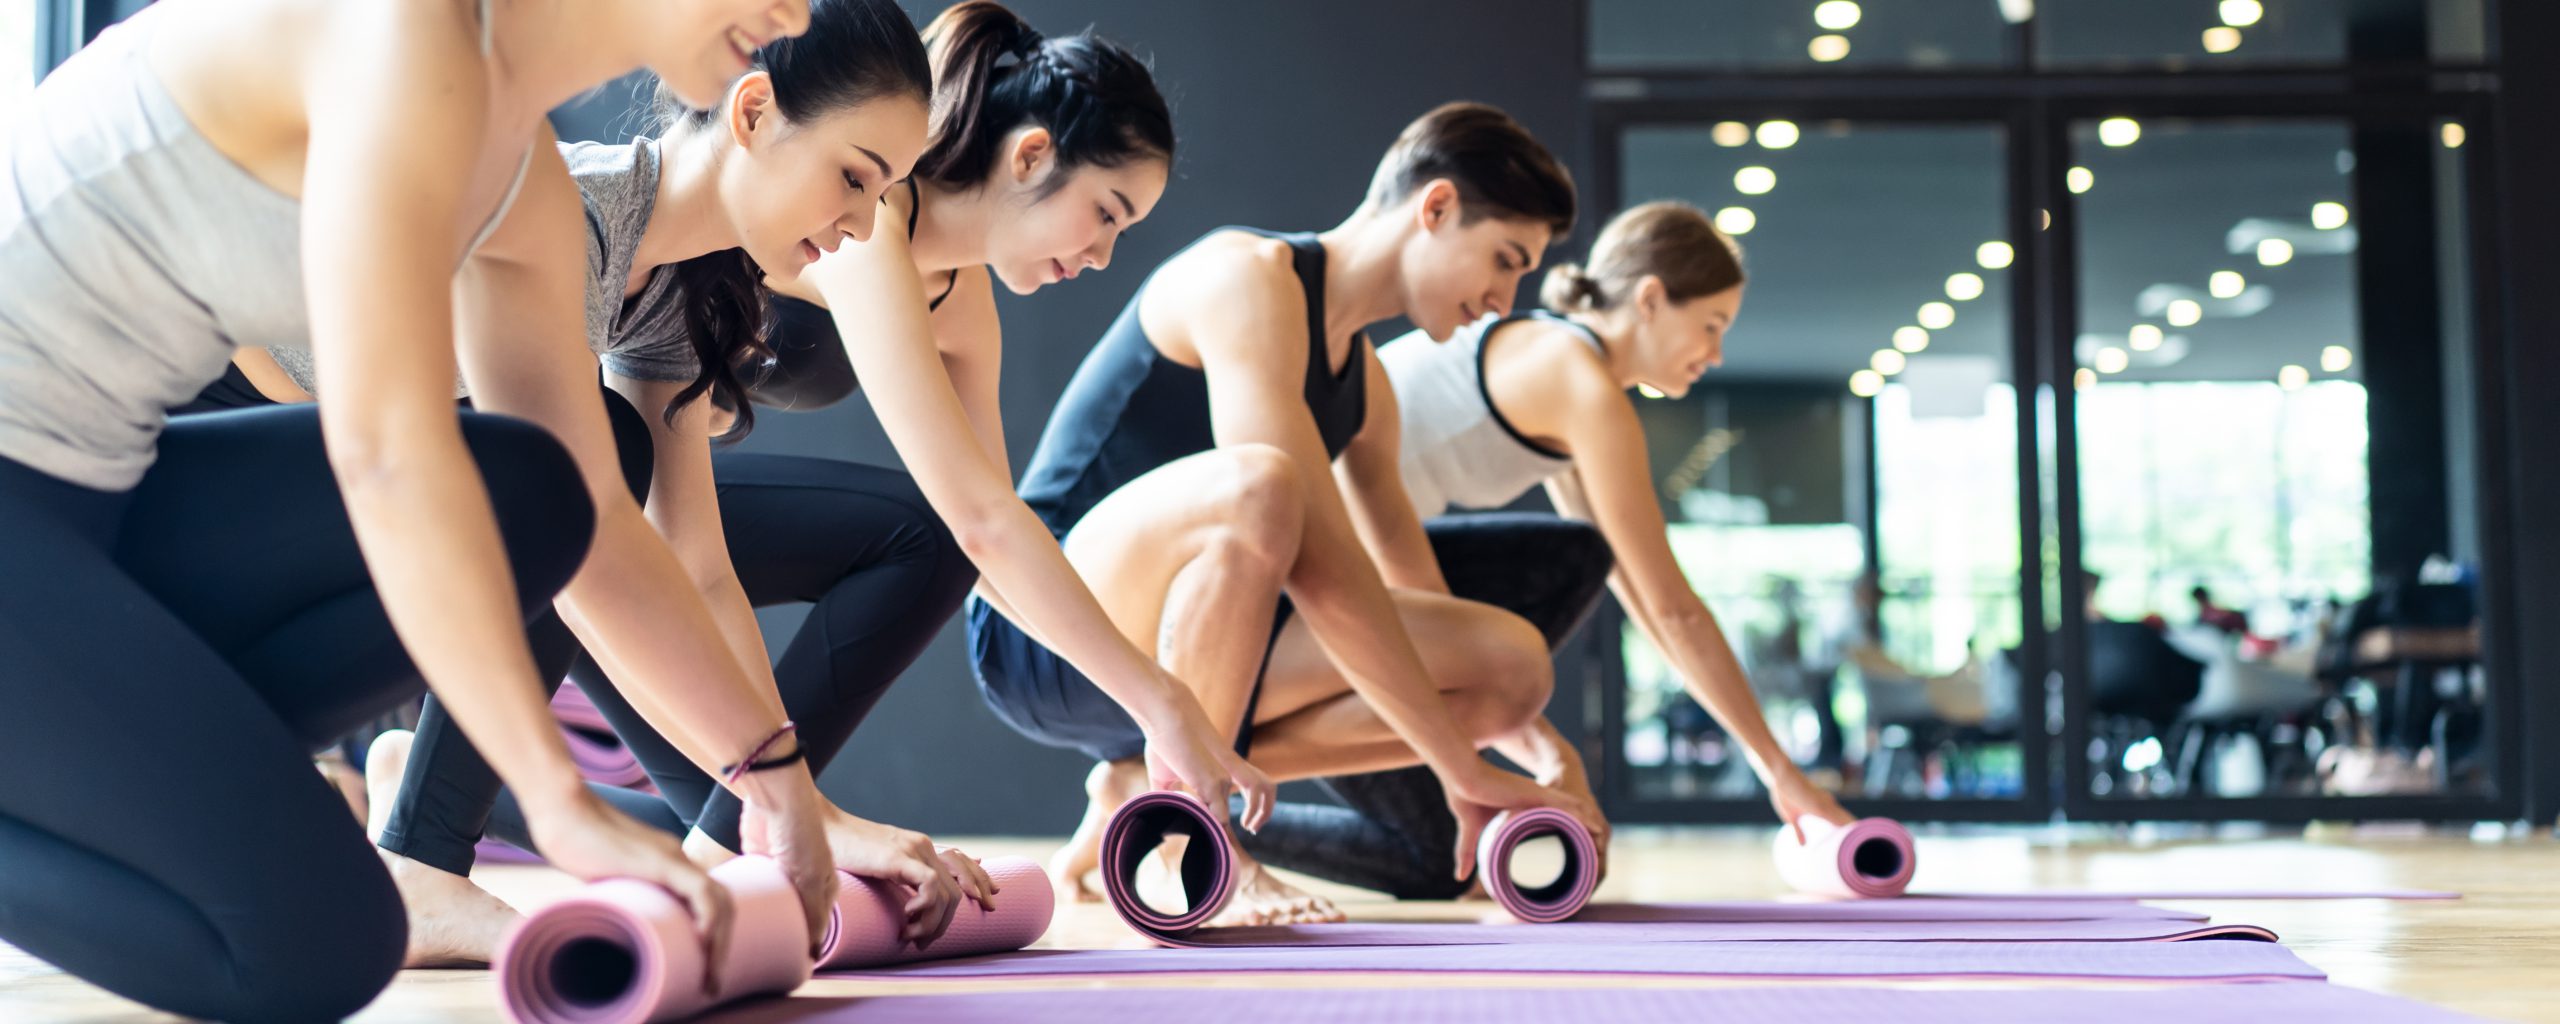 Group of sporty diversity people rolling the yoga mat after training yoga workout in studio room at gym fitness club. They have a good body shape and fit due to exercise and training yoga. Banner size